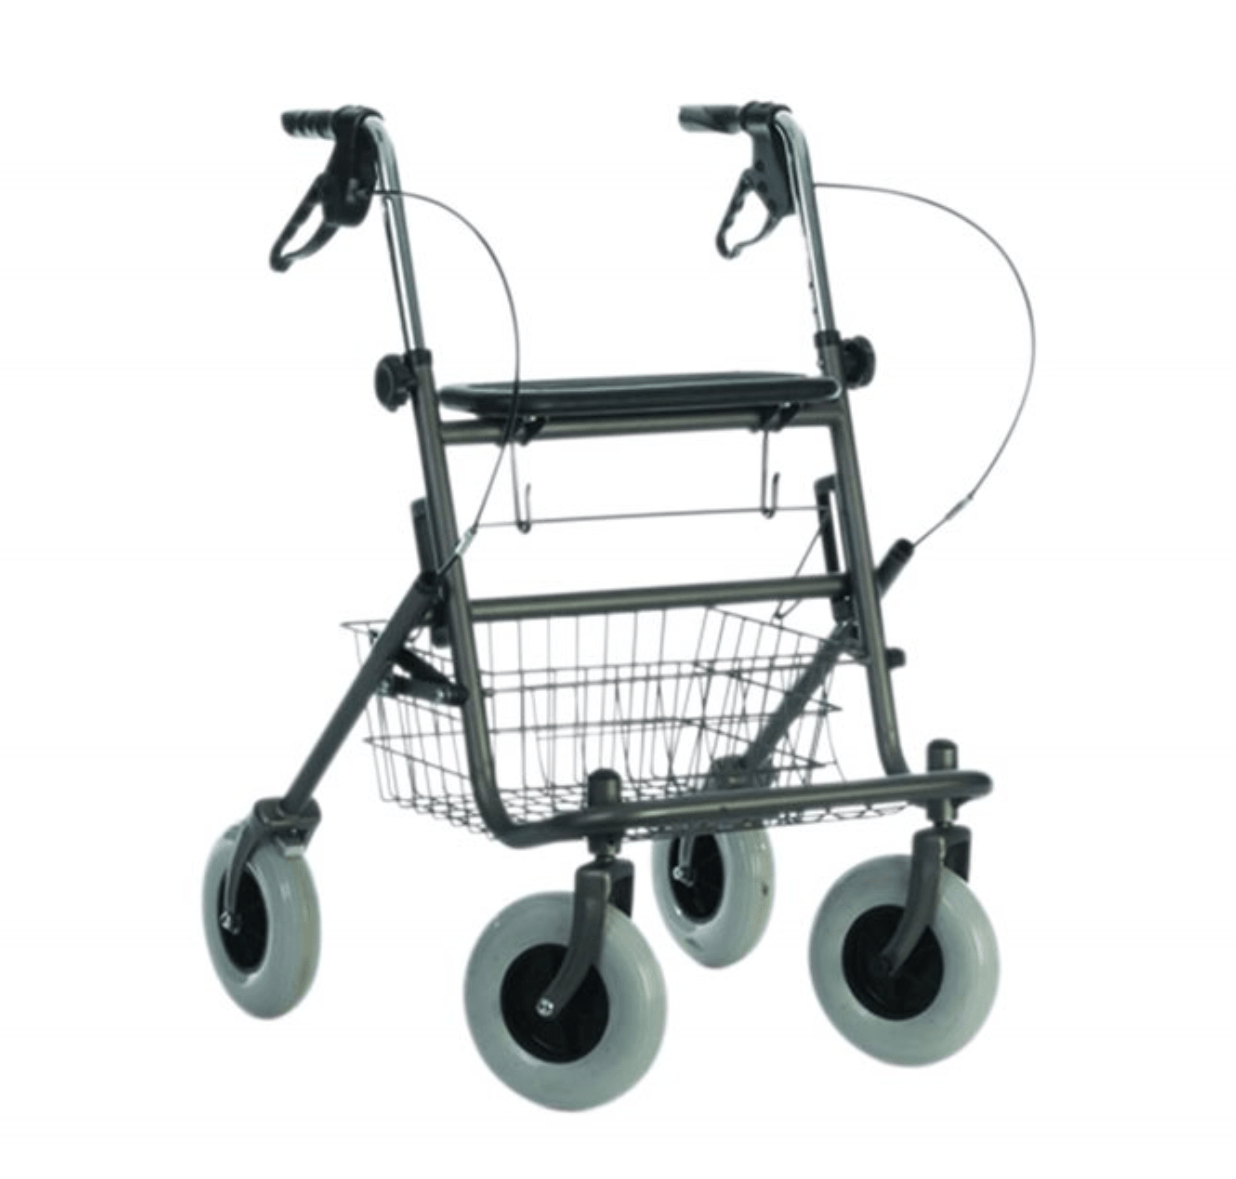 The Helping Hand Company daily living aids 4 Wheel Rollator With Seat and Basket- Grey